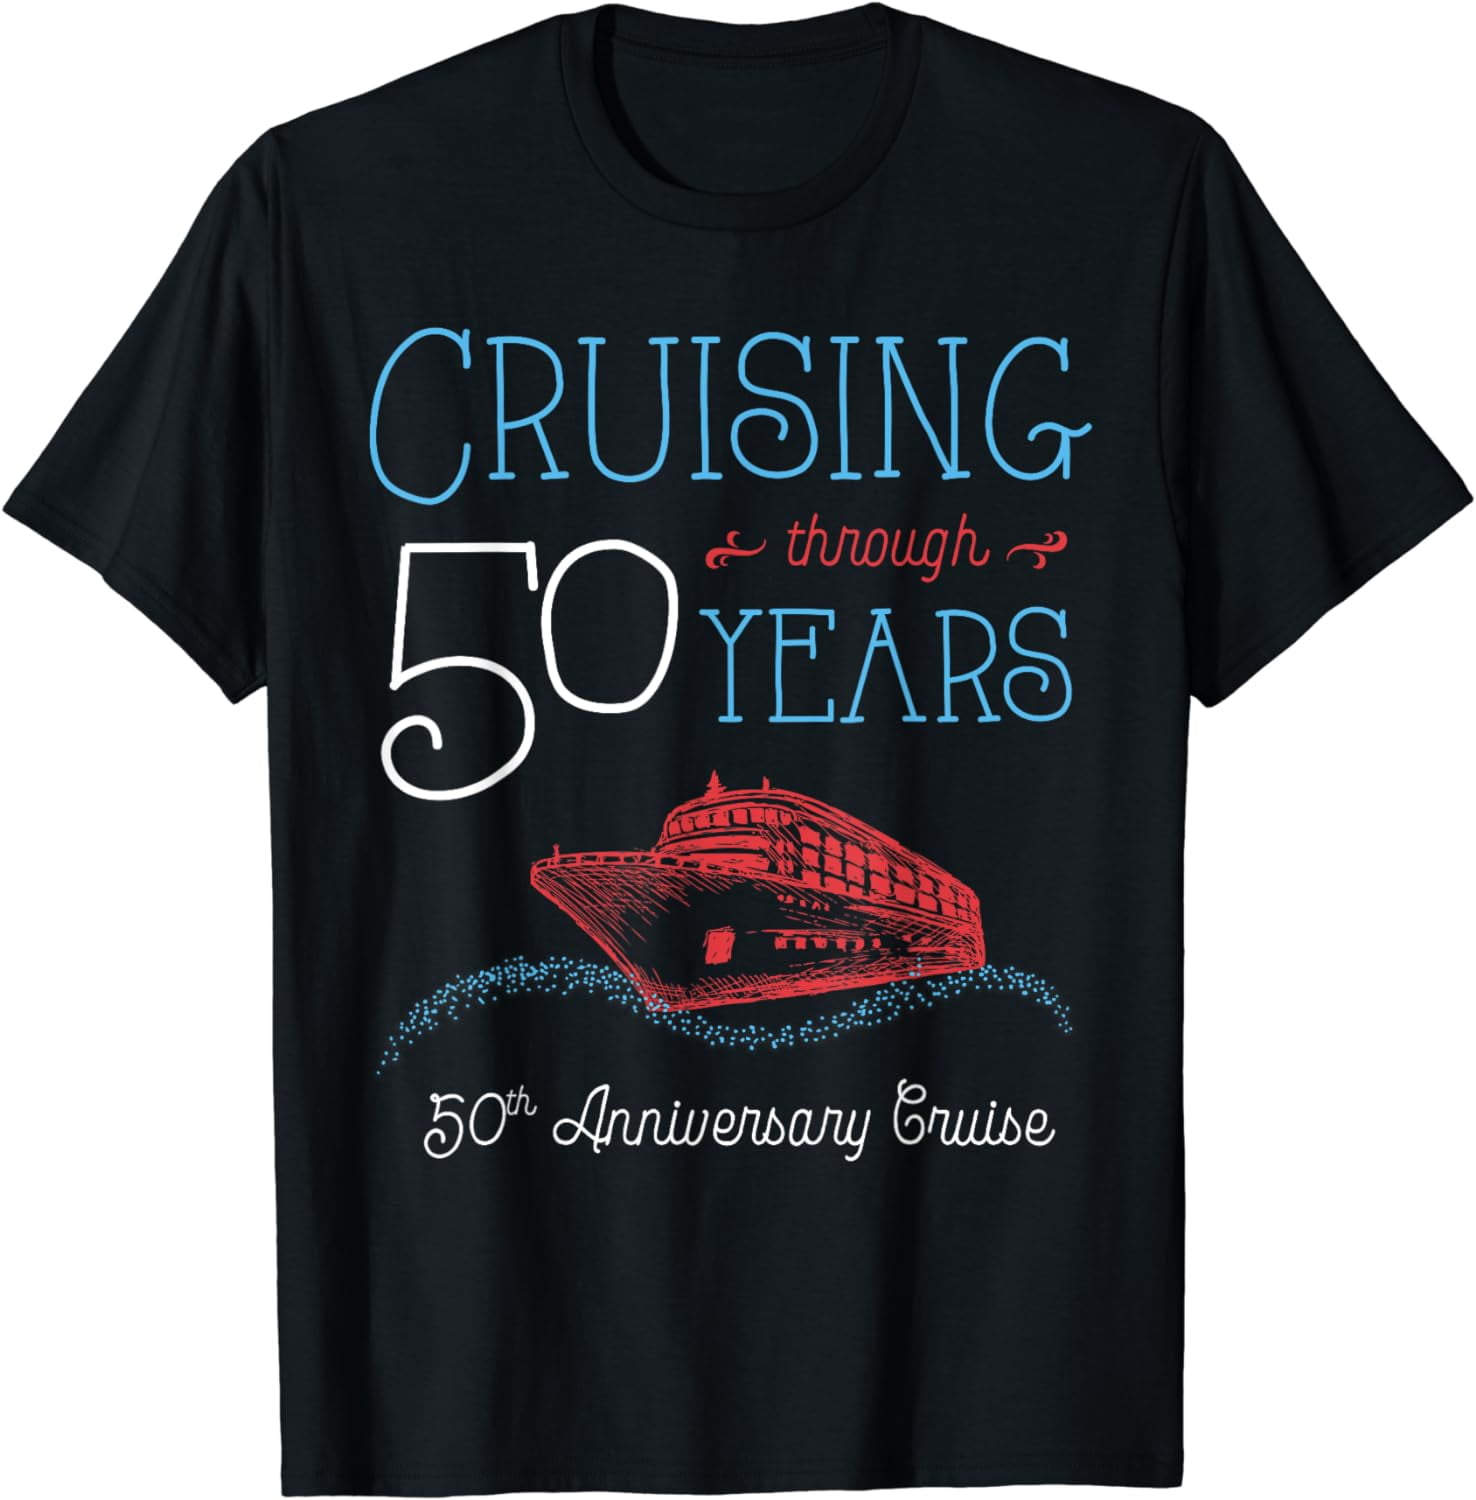 100% Cotton 50th Anniversary Cruise T Shirt His and Hers Matching ...